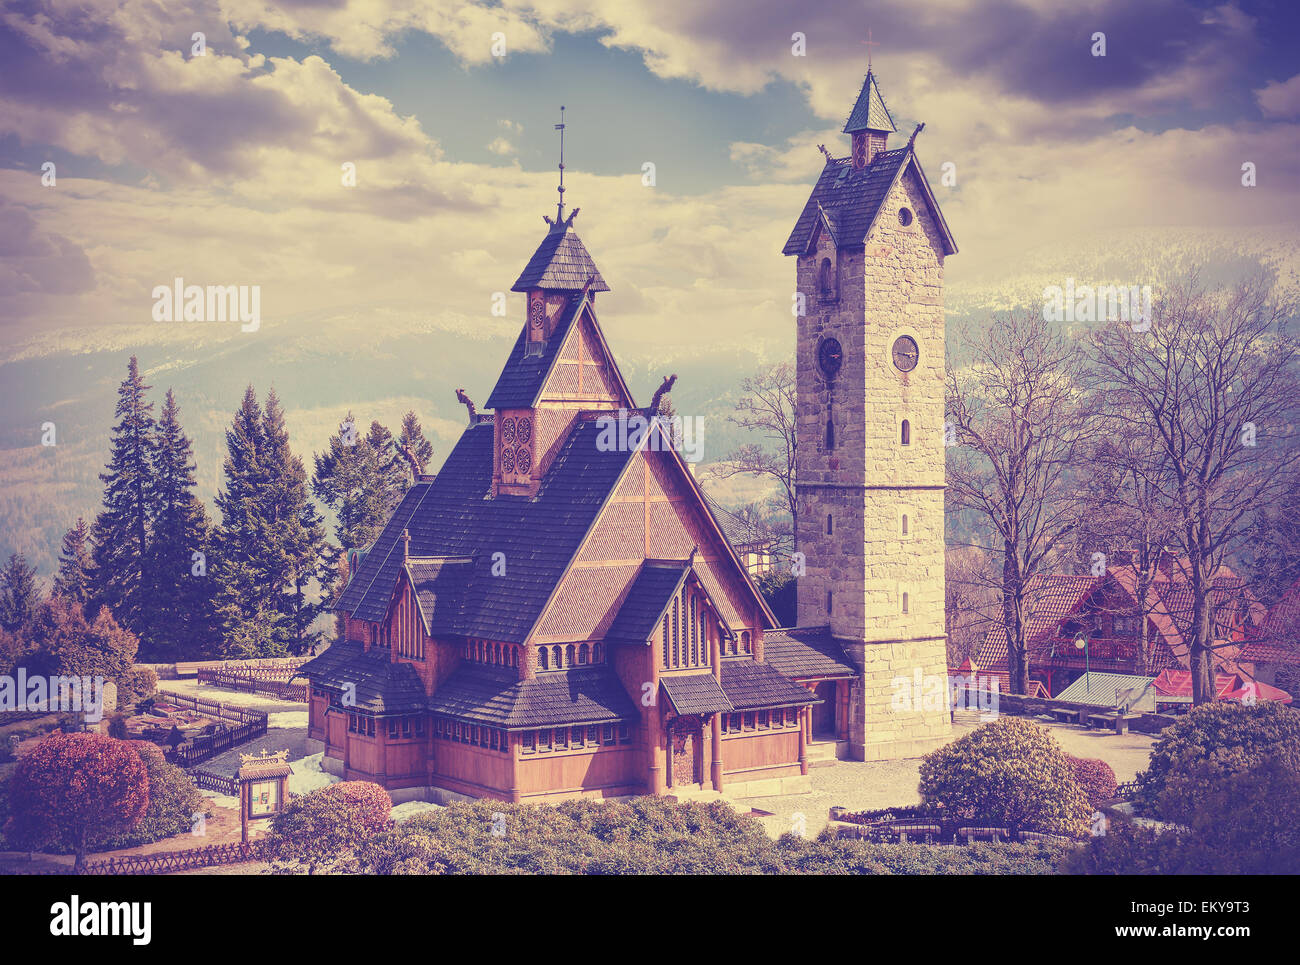 Vintage retro filtered old wooden temple Wang in Karpacz, Poland. Stock Photo